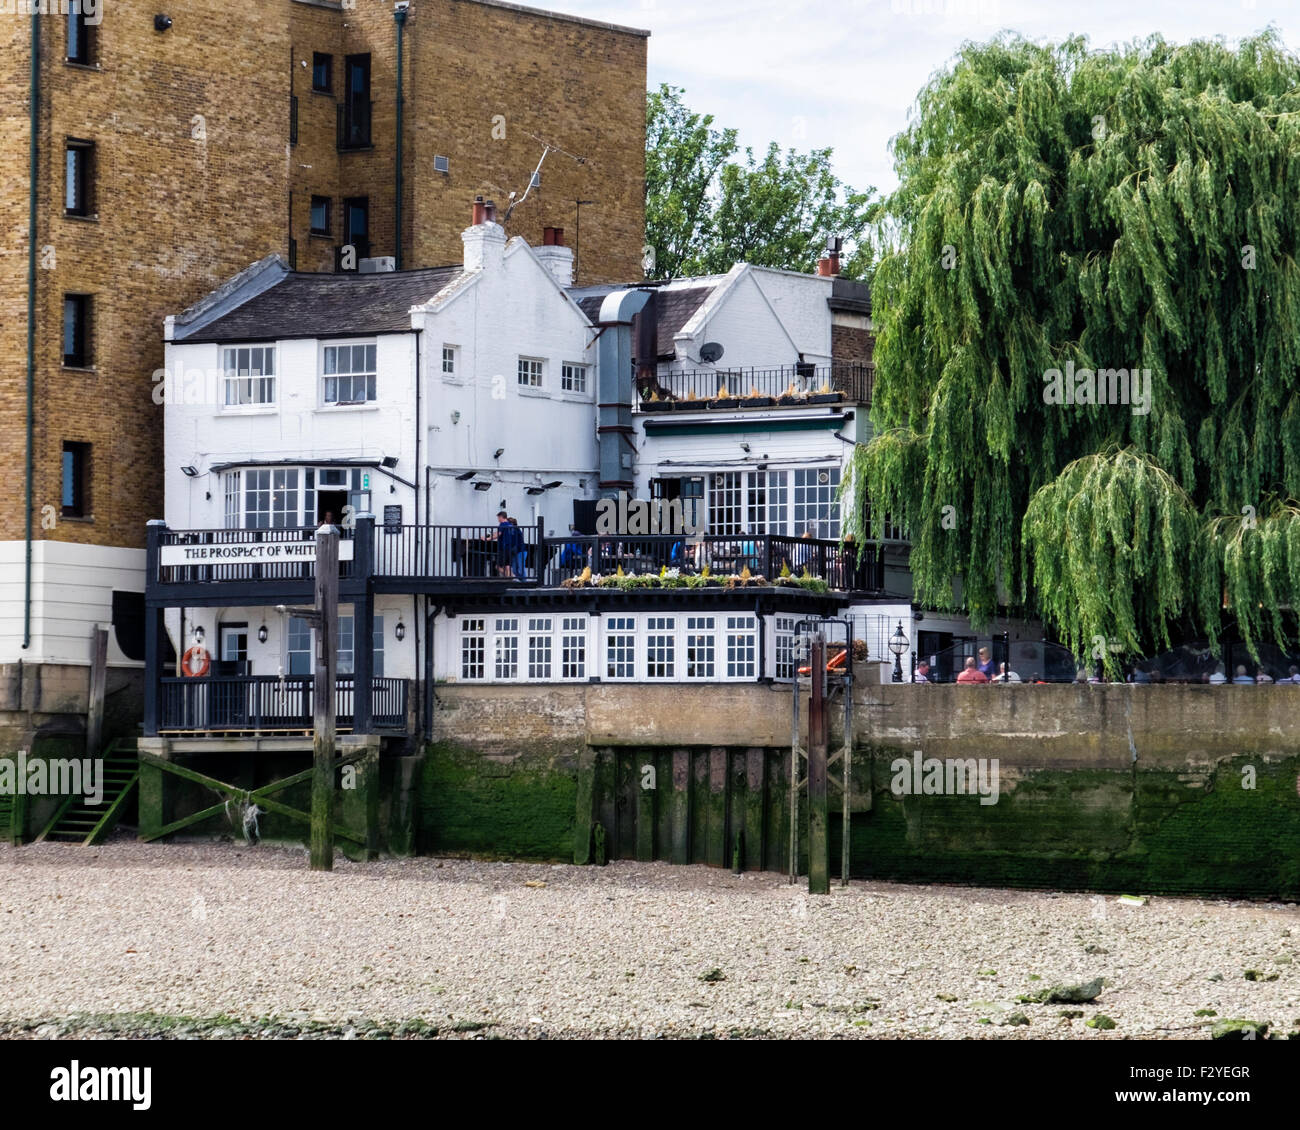 Prospect of Whitby, traditionelle englische Riverside Pub bei Ebbe Thames, London UK Stockfoto